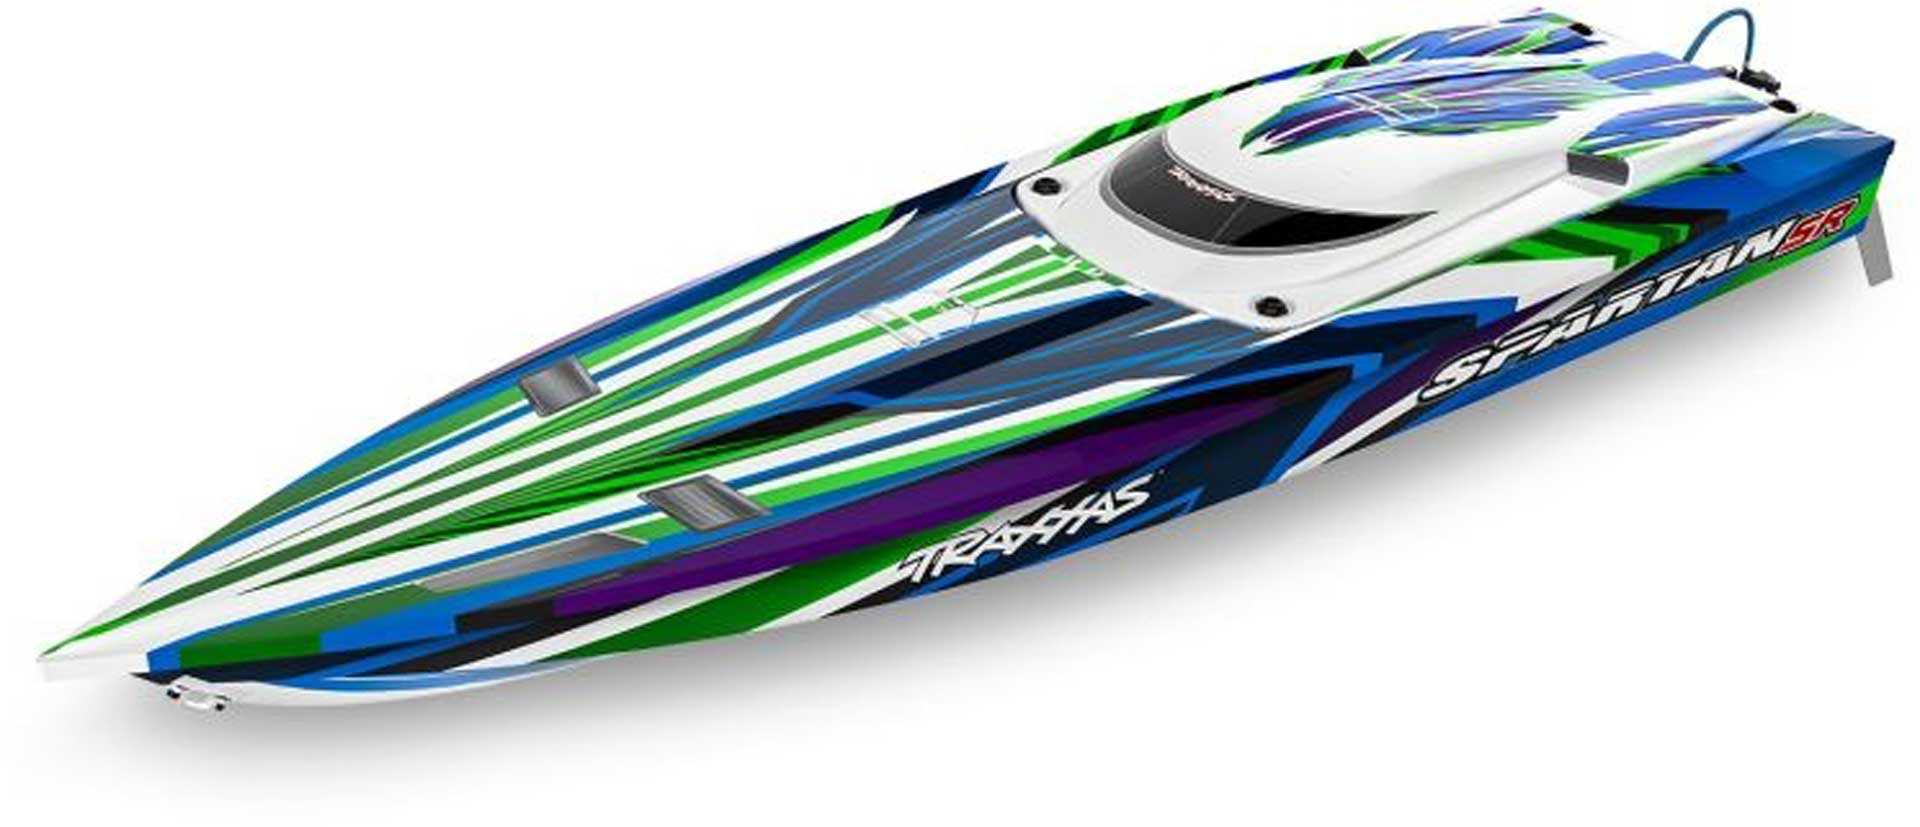 TRAXXAS SPARTAN SR GREEN 36-INCH RACER WITH SELF-RIGHTING BRUSHLESS WITHOUT BATTERY AND CHARGER